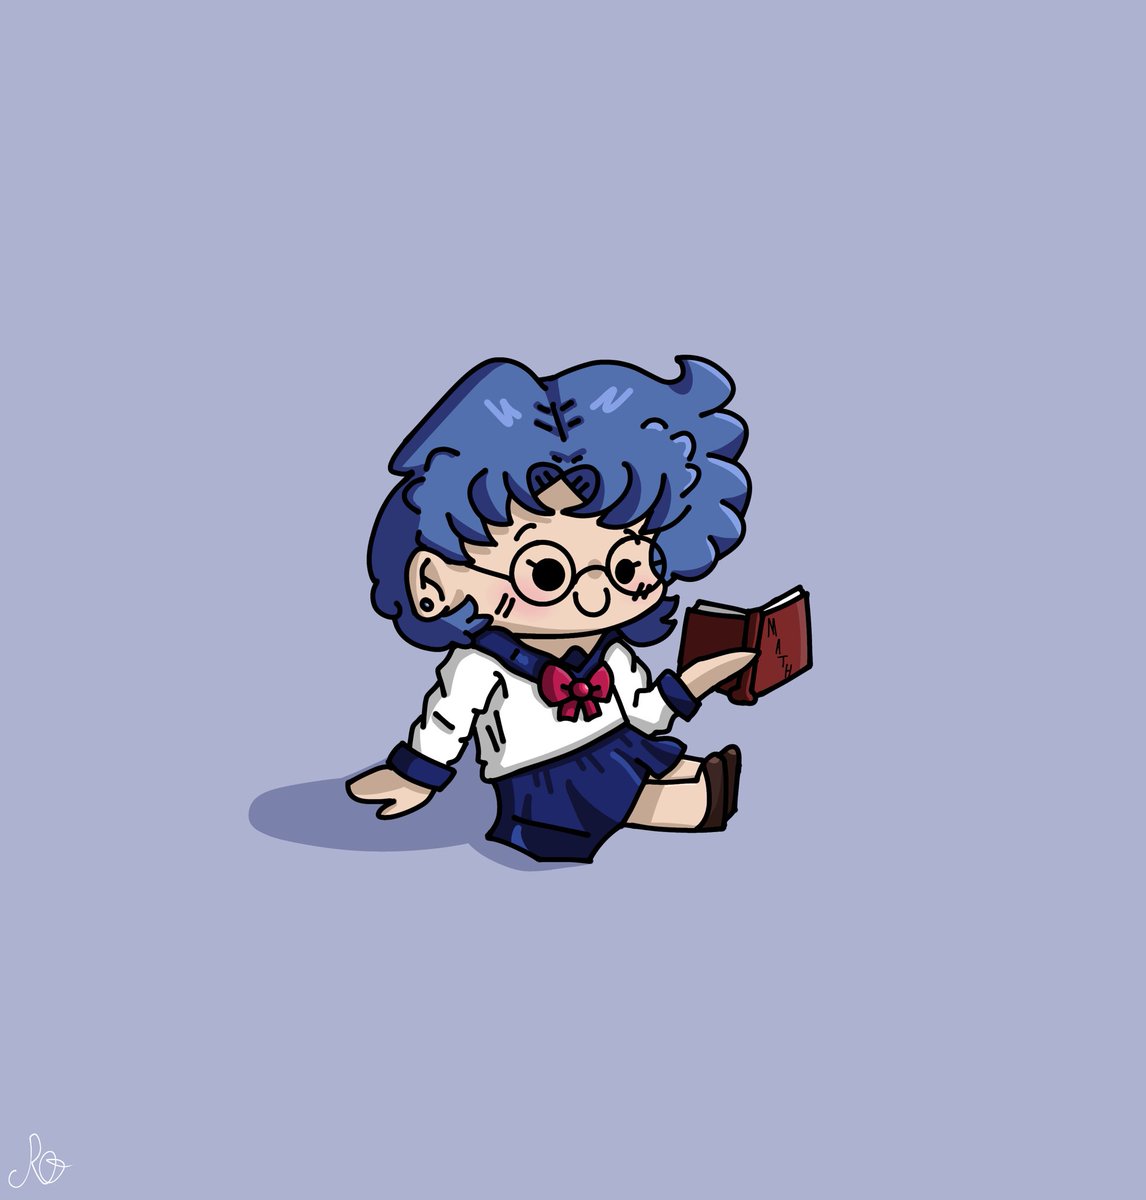 SHE’S JUST- the cutest thingy
#amimizuno #sailormercury #sailormoon 

(I’ll try posting less starting from now on)